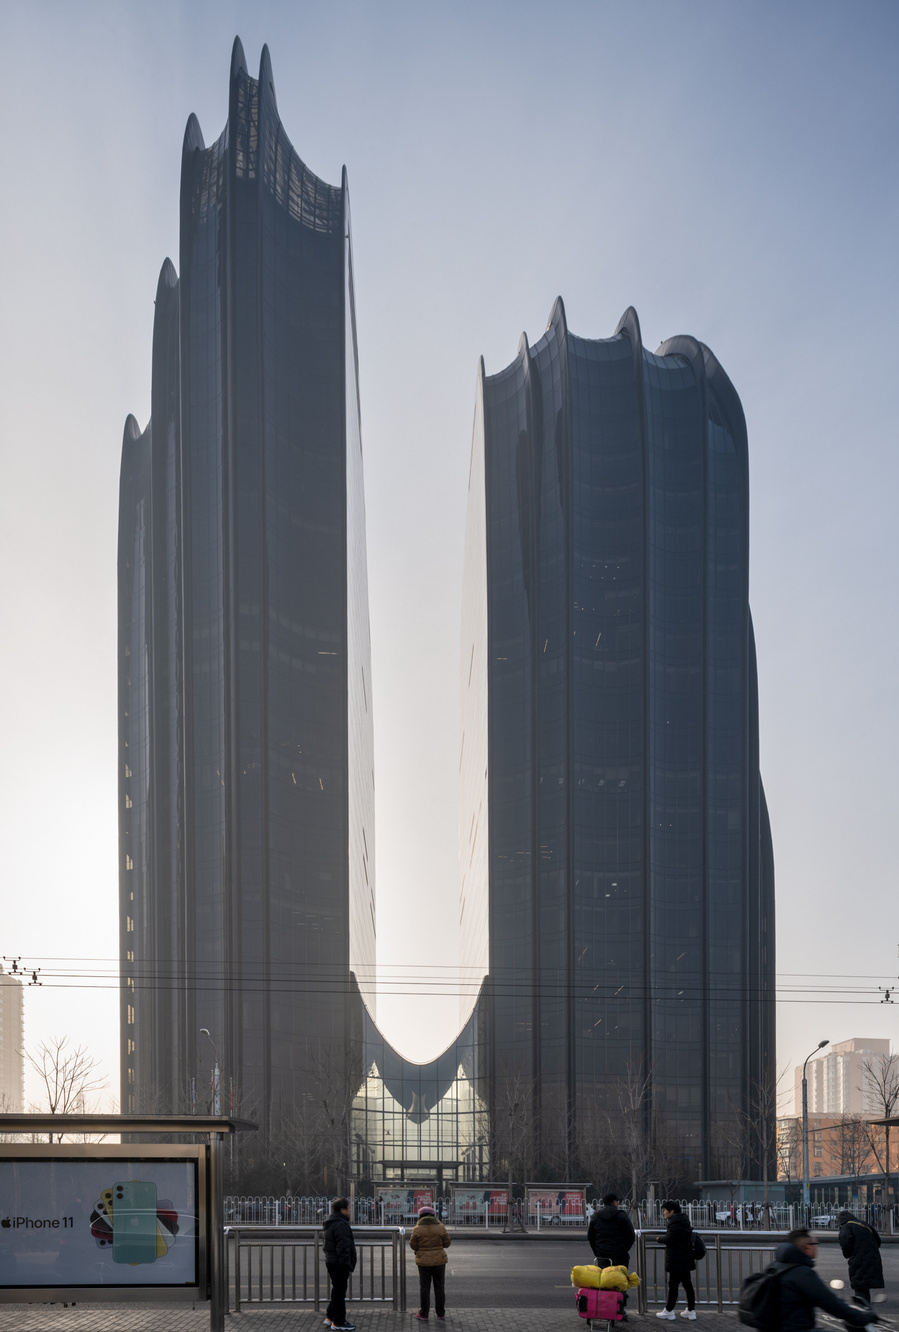 MAD Architects Beijing China Chaoyang Park Plaza. Canadian architectural photographer Adrian Ozimek photographs the exterior of this project at sunrise. Inspired by traditional Chinese landscape paintings